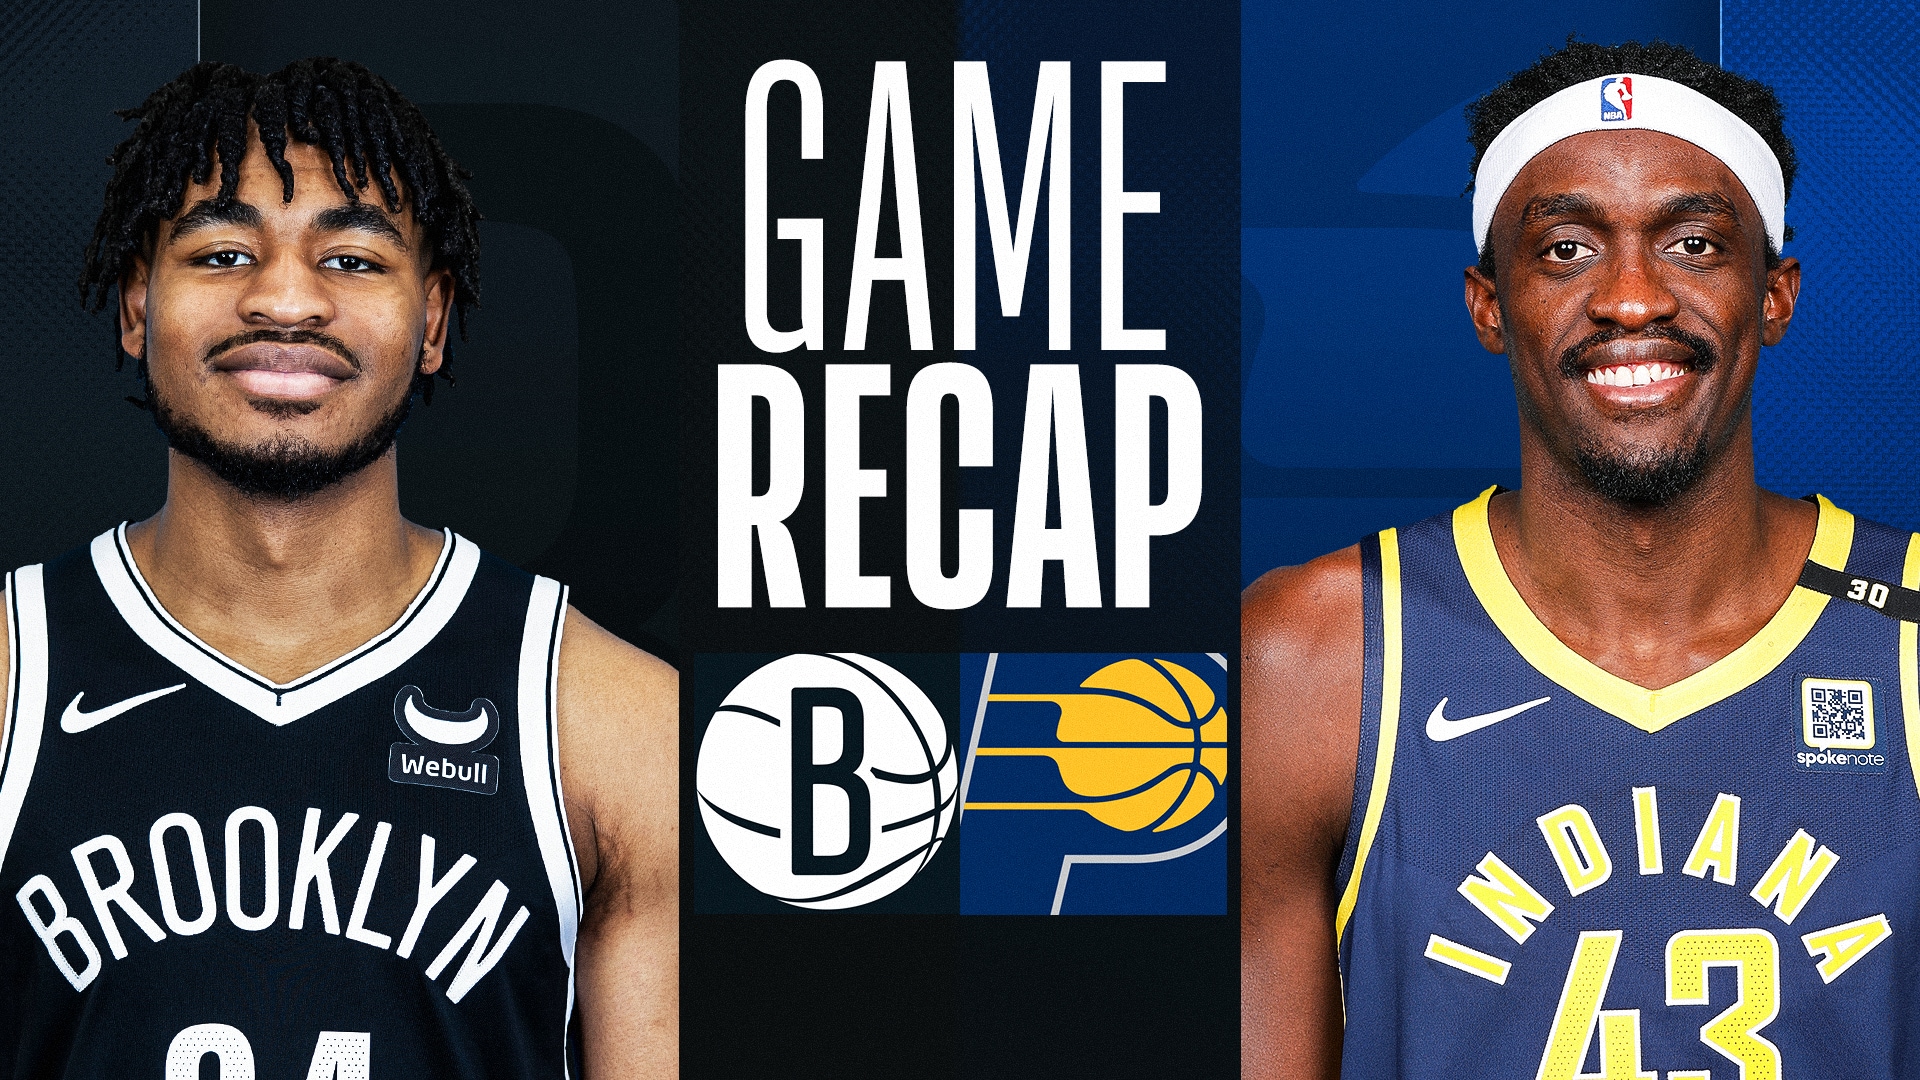 Game Recap: Pacers 121, Nets 100